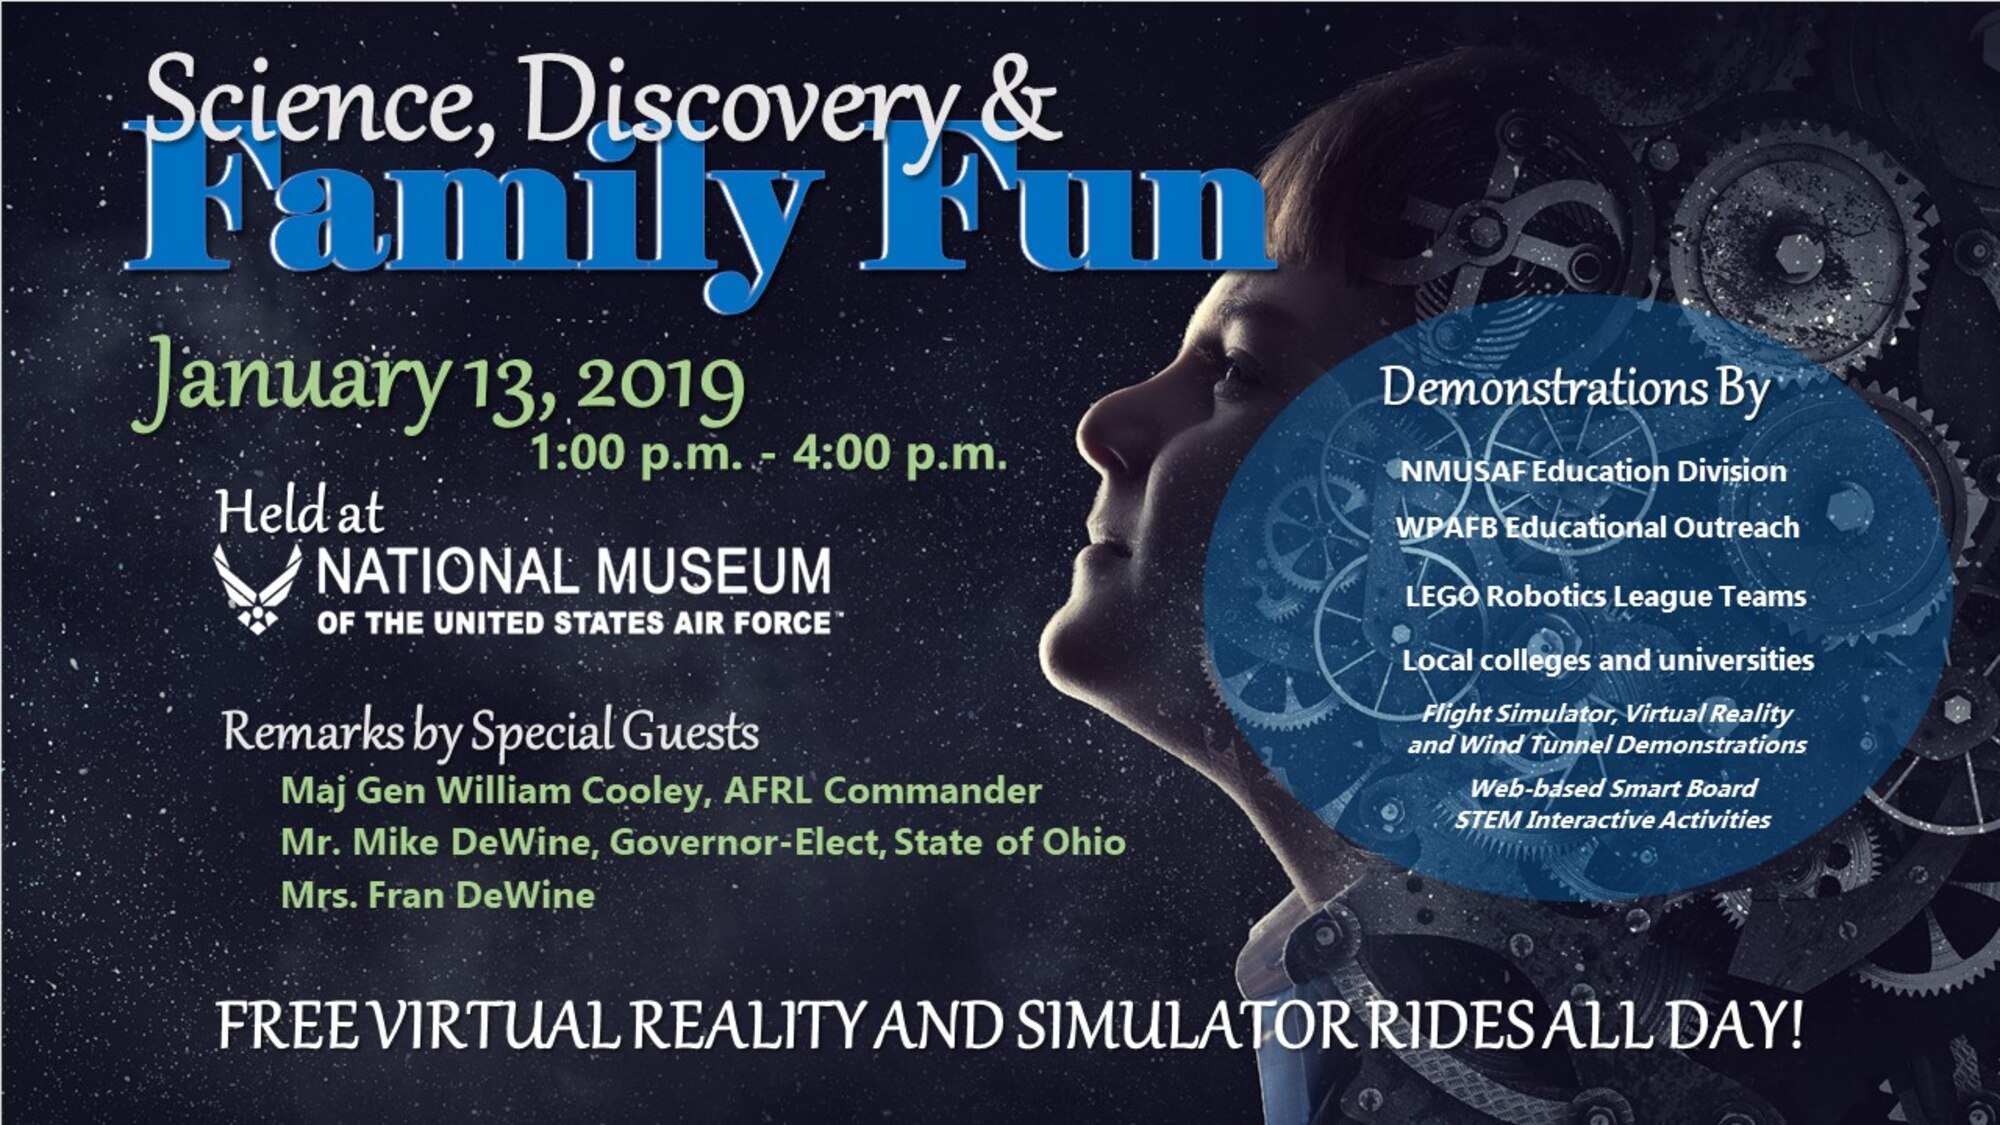 The U.S. Air Force will host a Science, Discovery and Family Fun event at the National Museum of the U.S. Air Force on Sunday, Jan. 13, from 1 – 4 p.m.